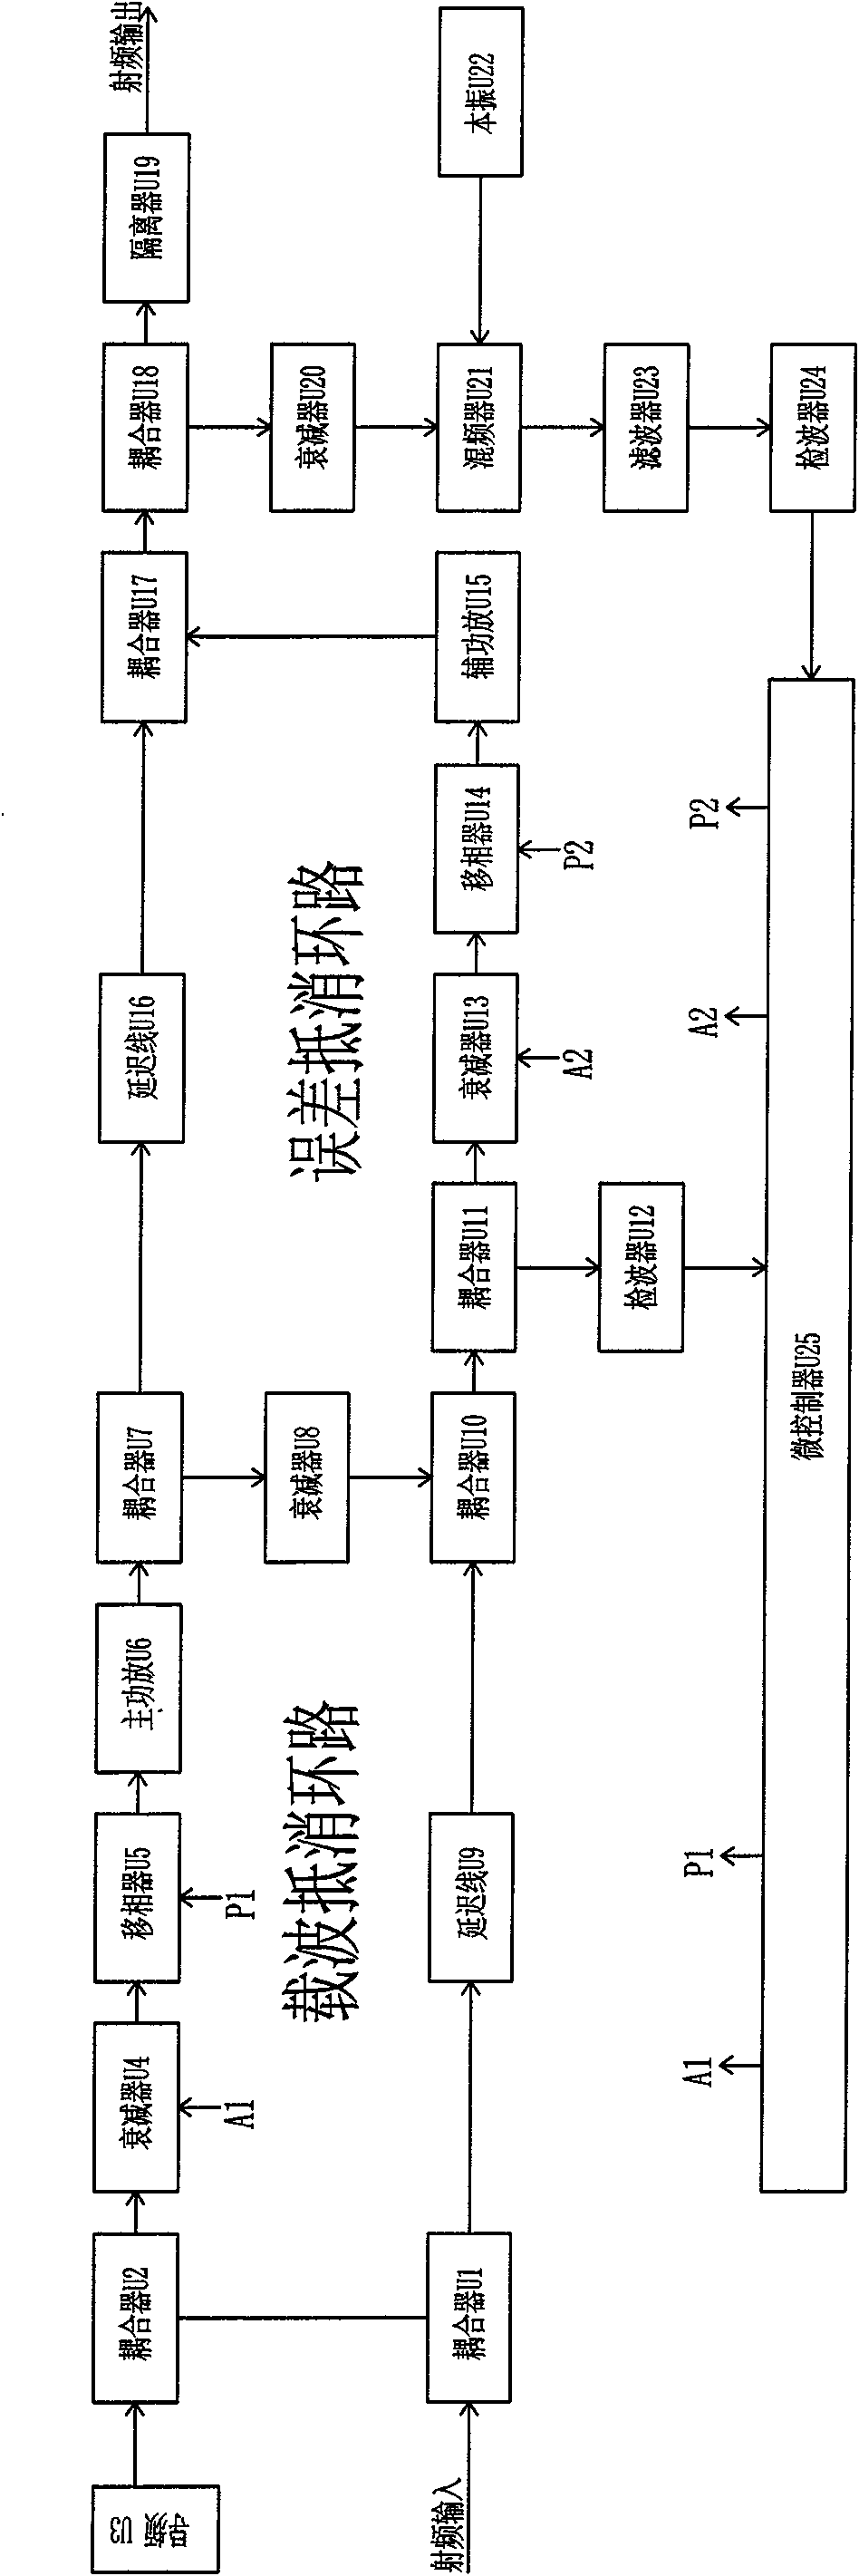 Self-adaptive feedforward linear power amplifier device based on pilot frequency and control method